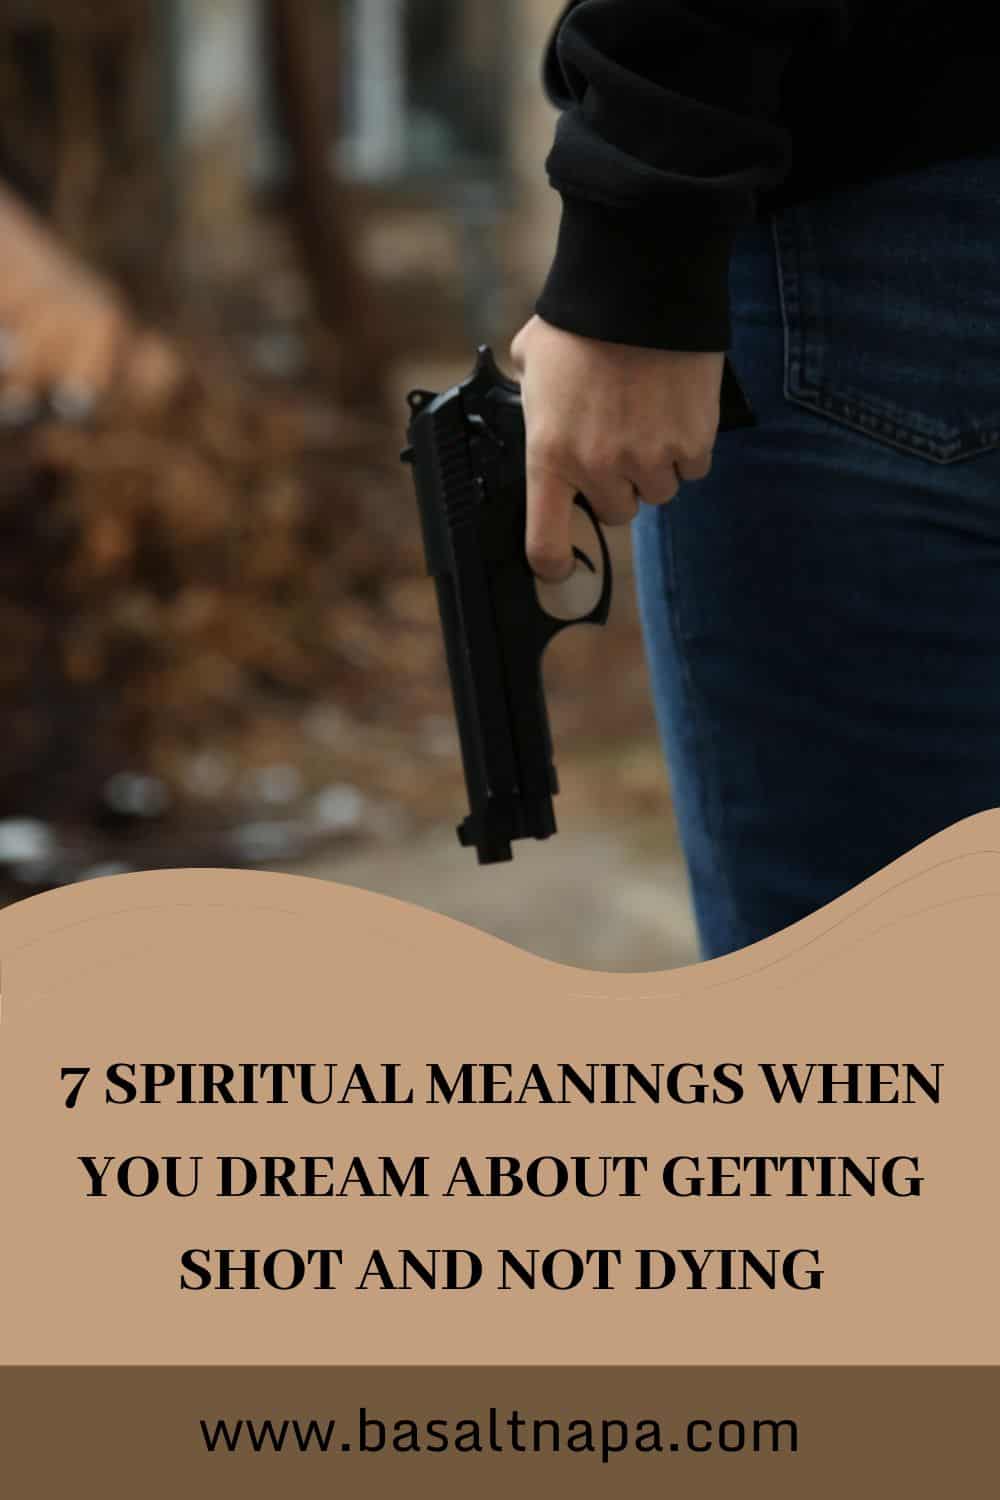 7 Spiritual Meanings When You Dream About Getting Shot and Not Dying